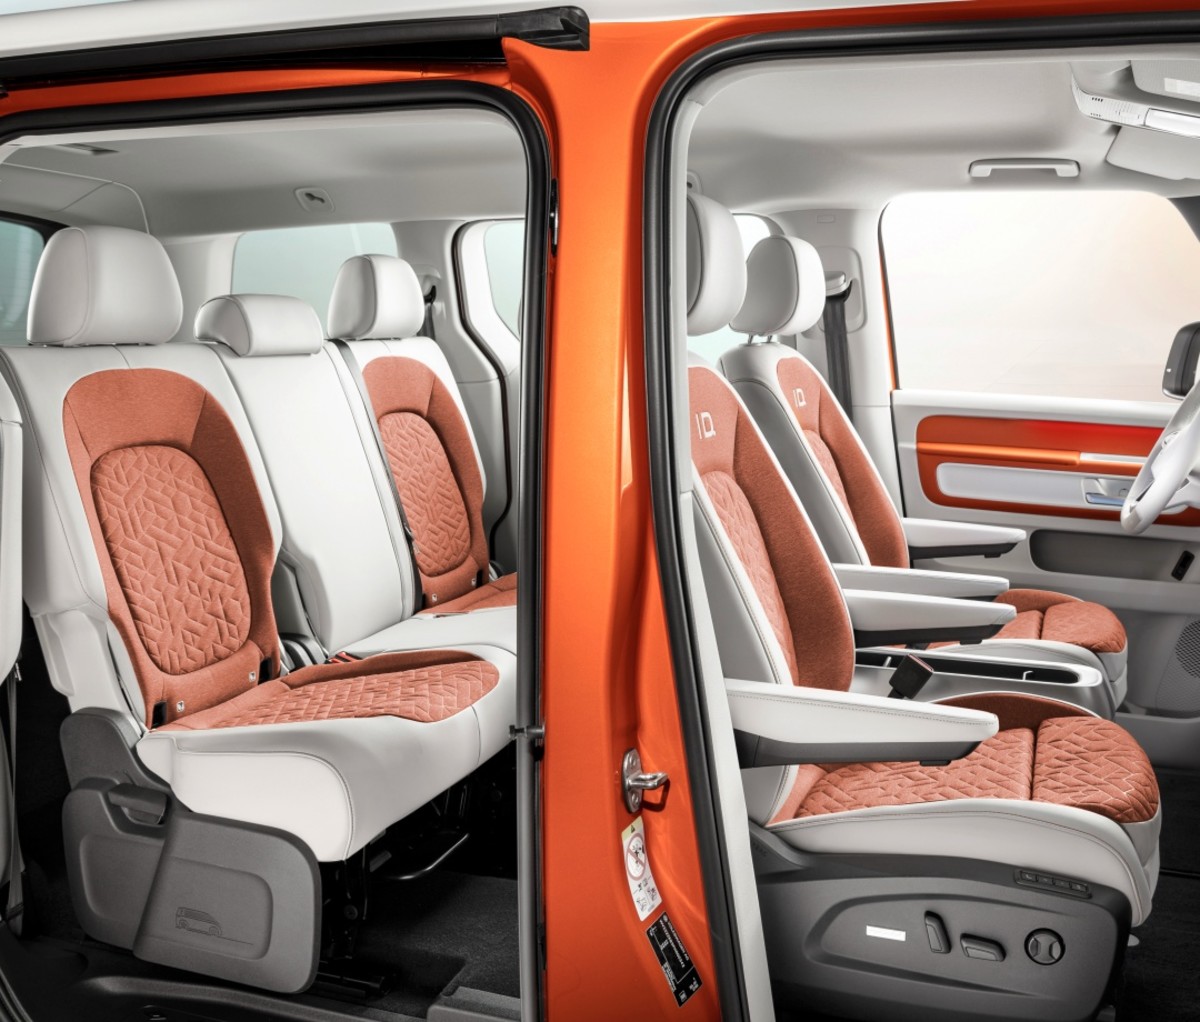 VW Id.Buzz interior showing front and rear passenger seats in orange and white fabric